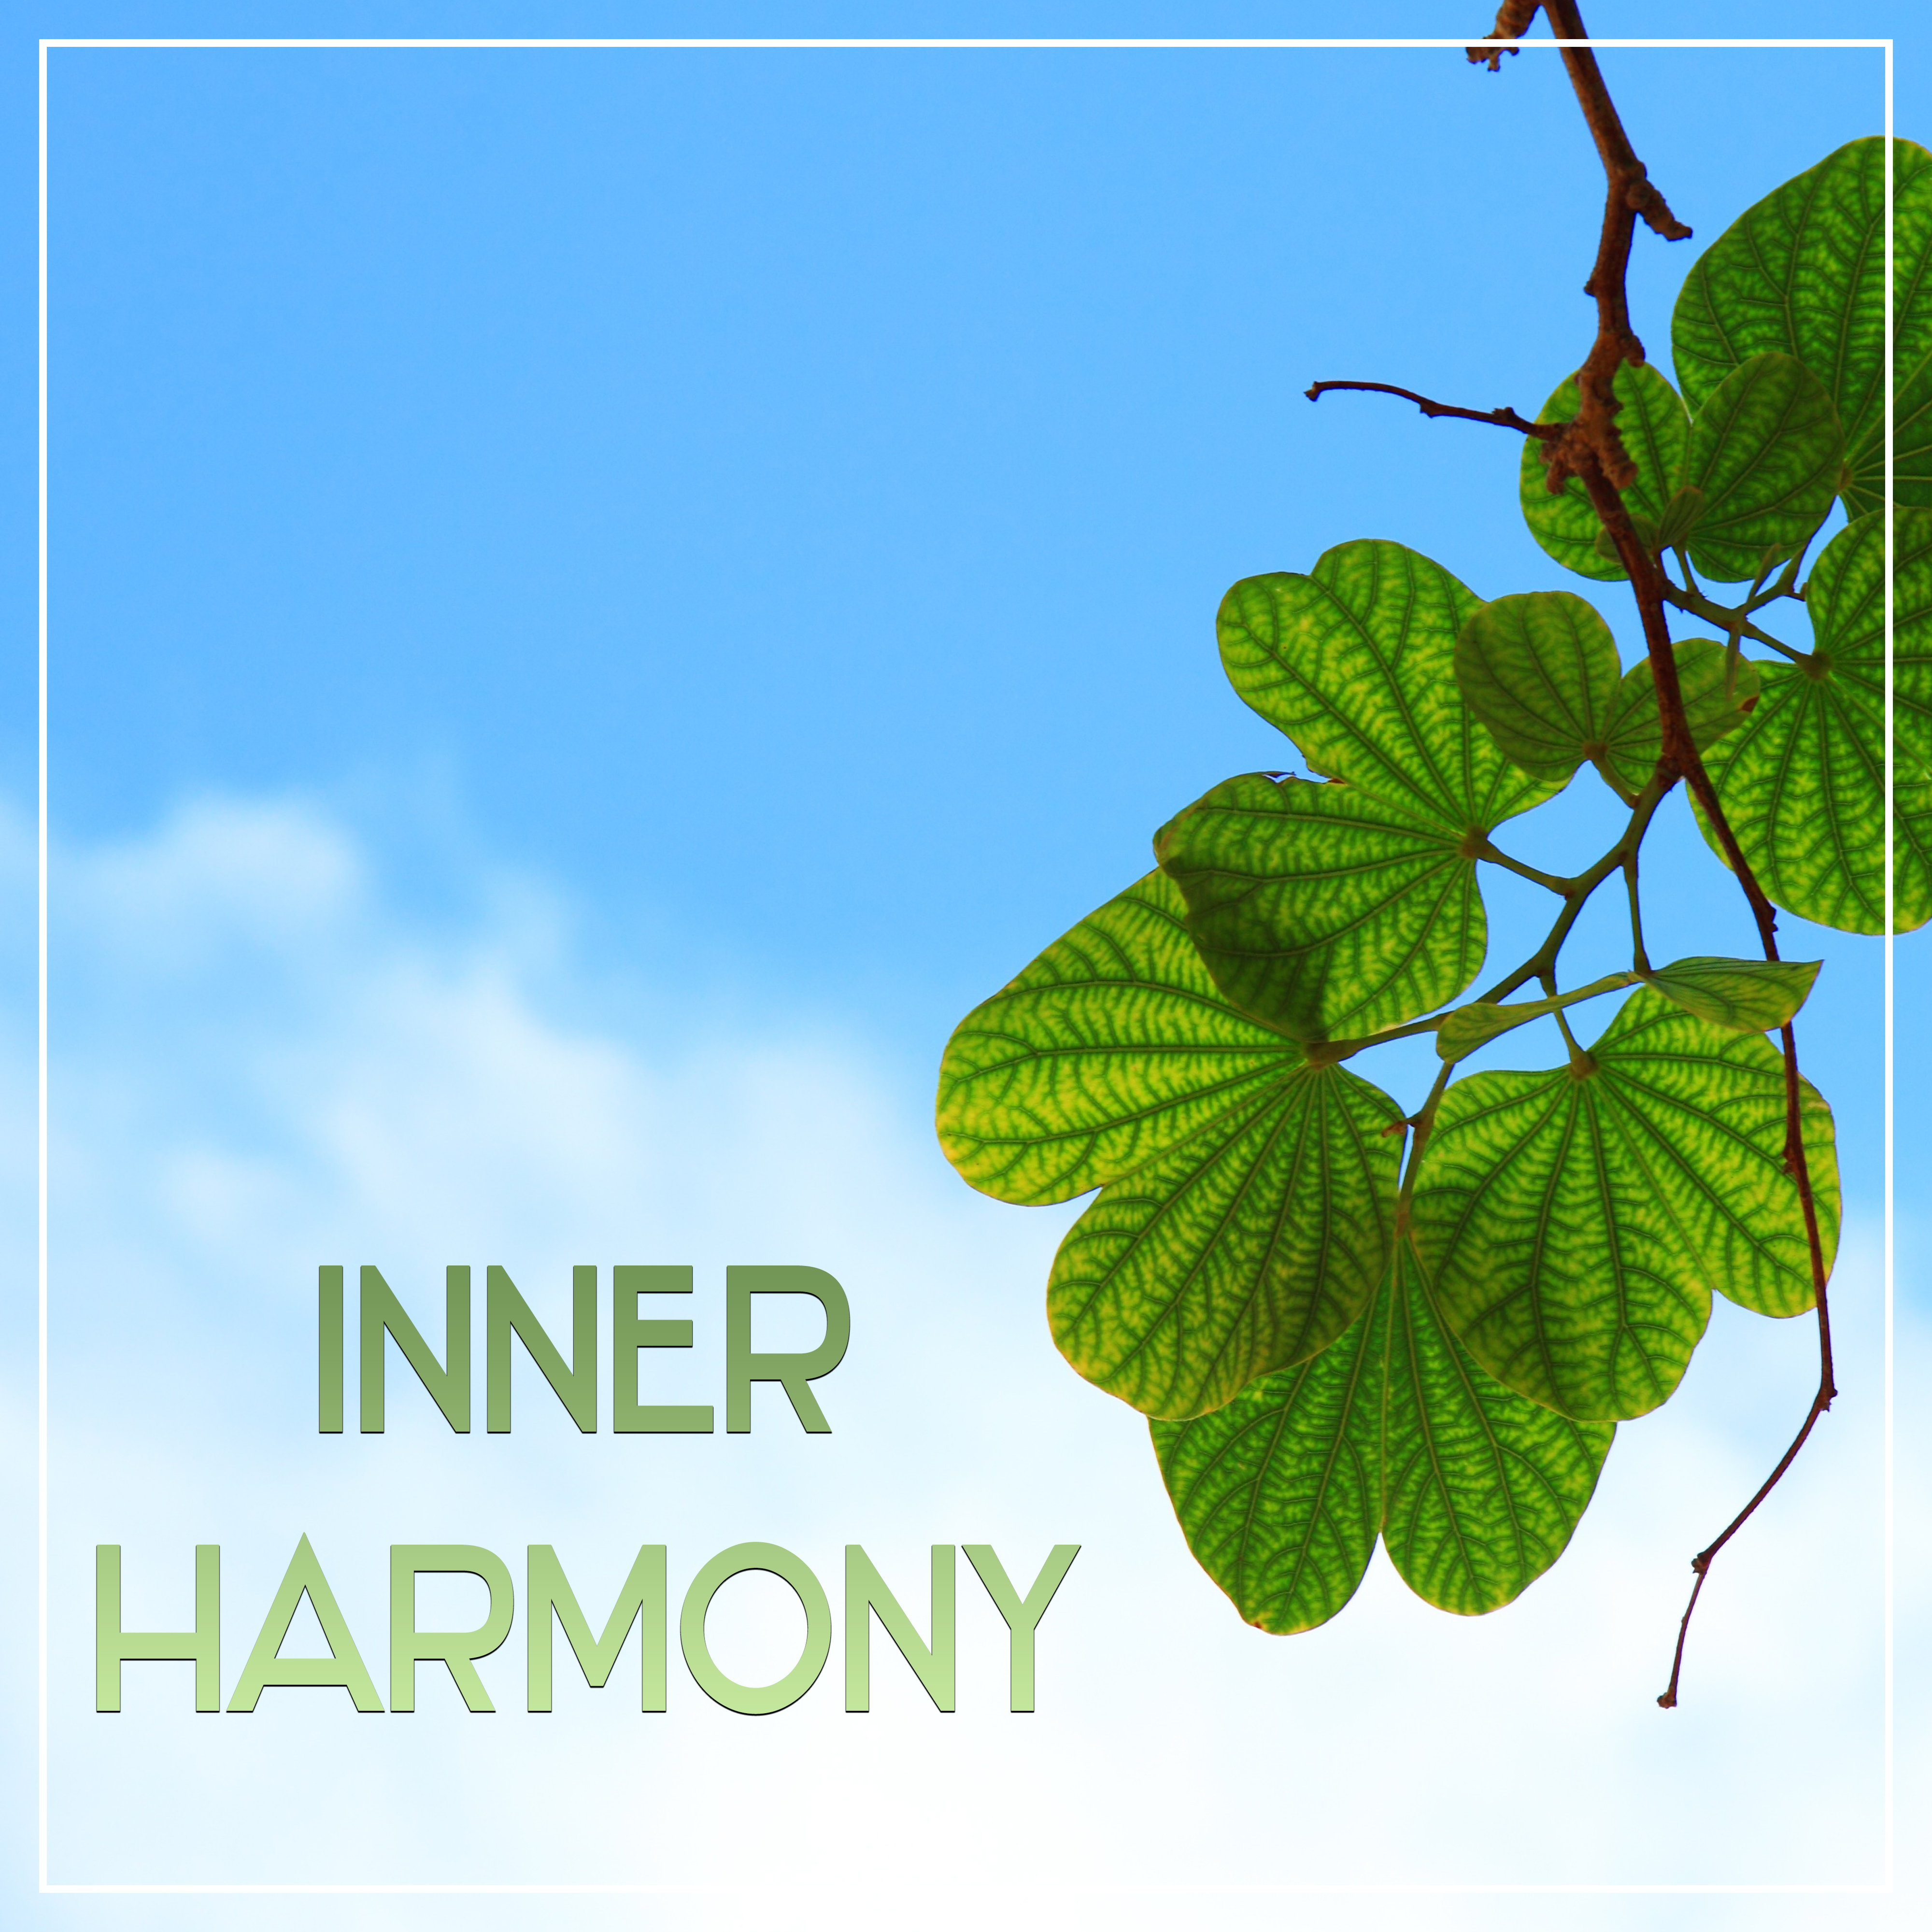 Inner Harmony – Music for Meditation, Yoga Sounds, Clear Mind, Calmness, Peaceful Melodies, Zen